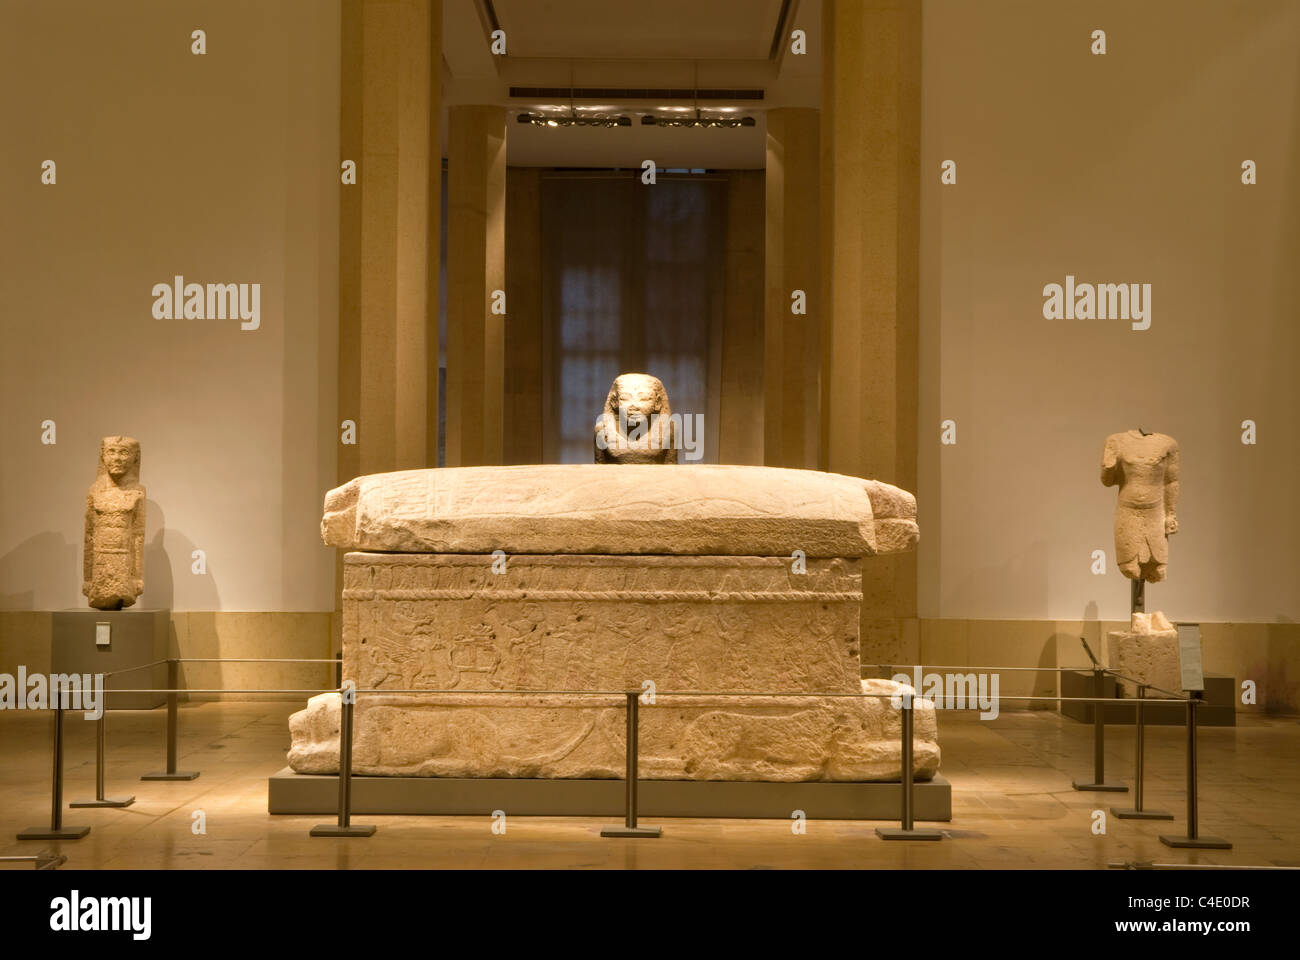 Ground floor of the National Museum, Beirut, Lebanon. King Ahiram of Byblos sarcophagus containing the earliest known alphabet... Stock Photo